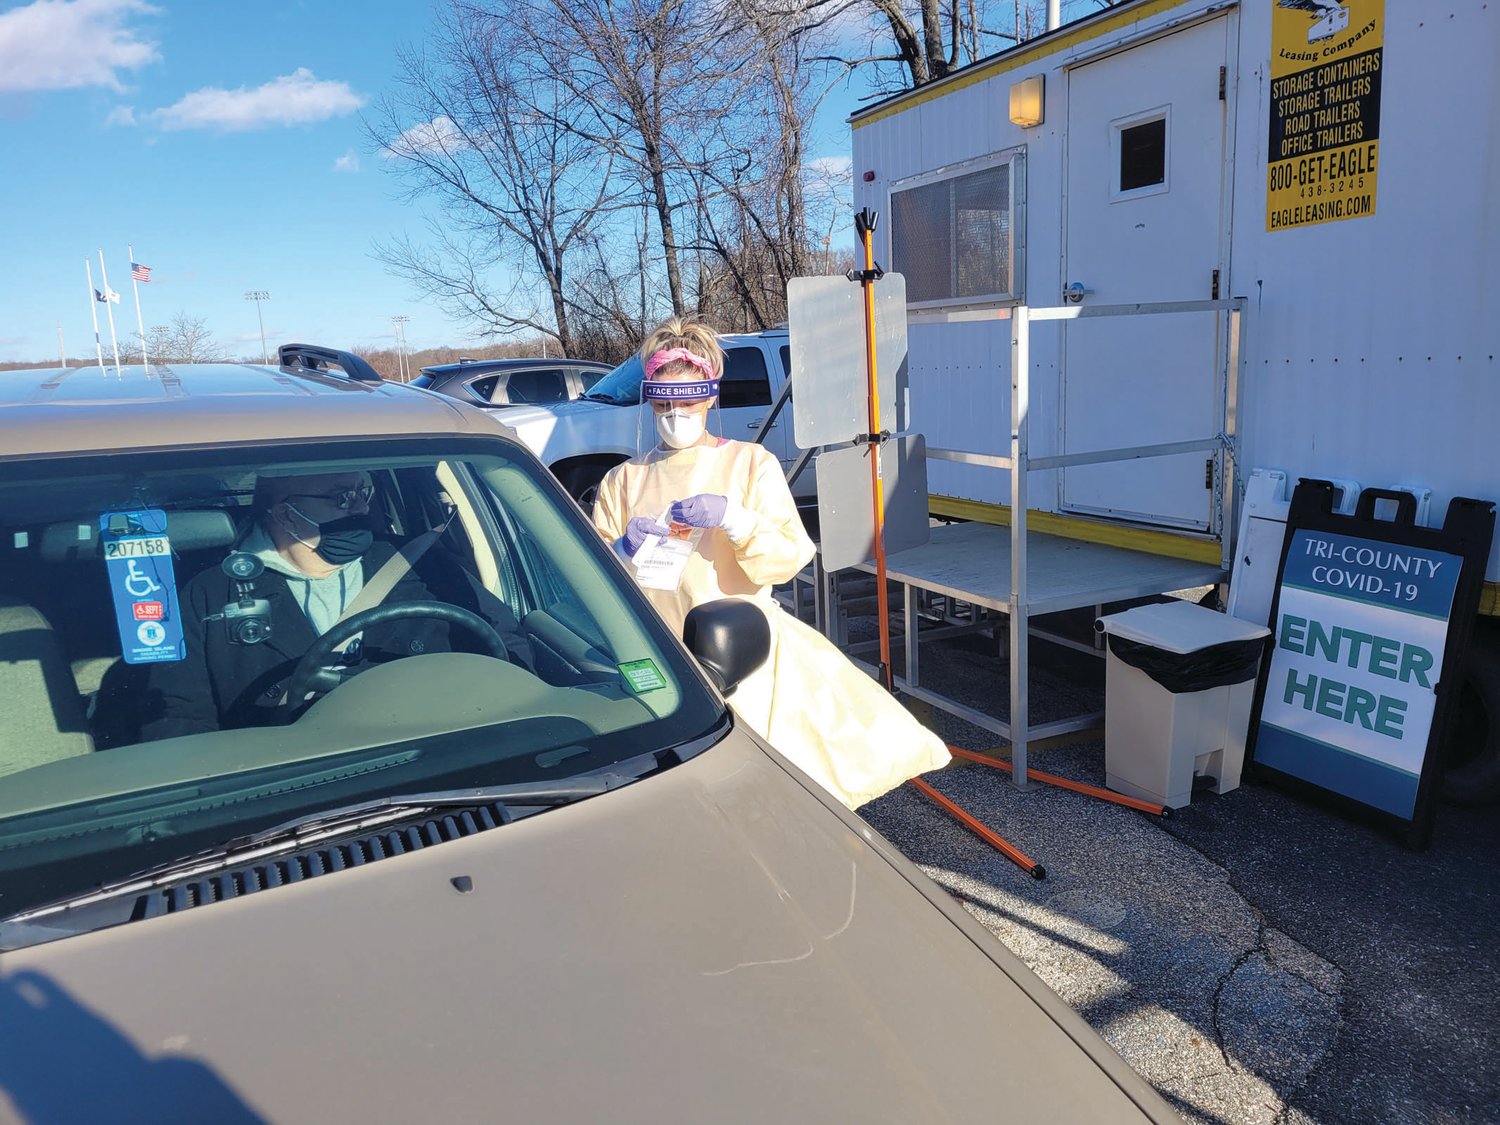 FREE TESTS: Tri-County Community Action Agency will staff the testing trailer in the high school parking lot, Monday through Friday, 9-11 a.m. and 2-4 p.m. Those who would like an appointment at the free test trailer need to call 401-519-1940.